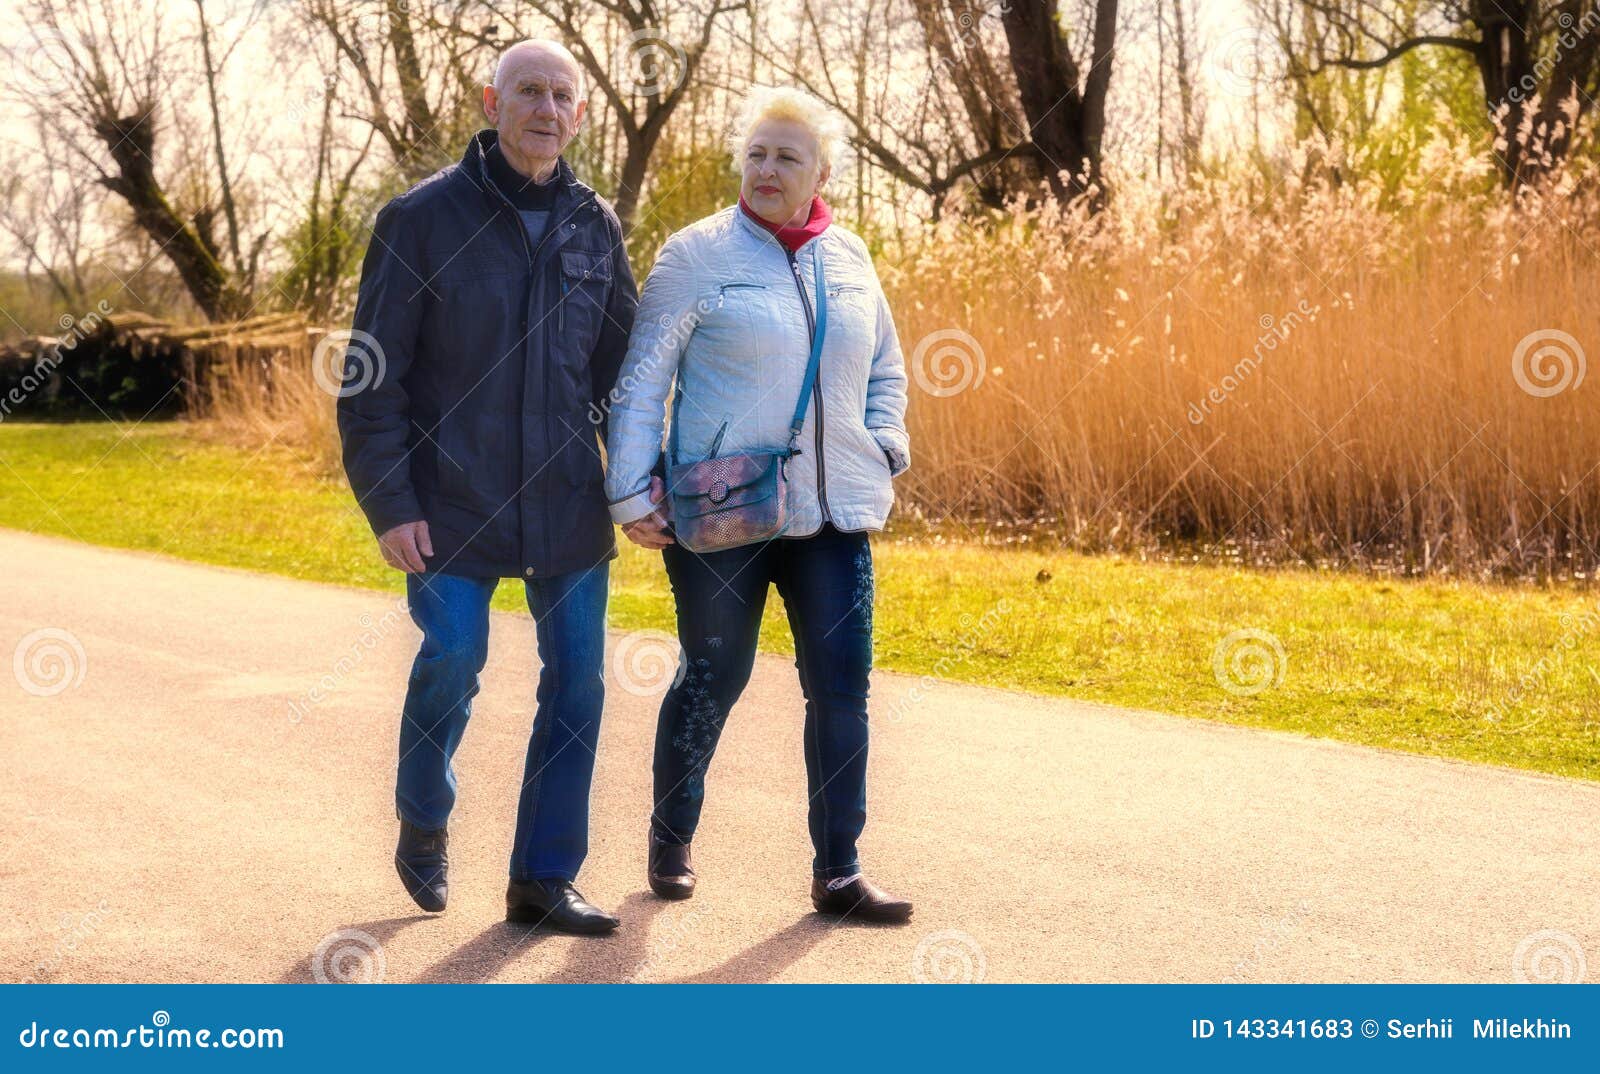 Two Seniors Walking in Spring Park Stock Image - Image of amour ...